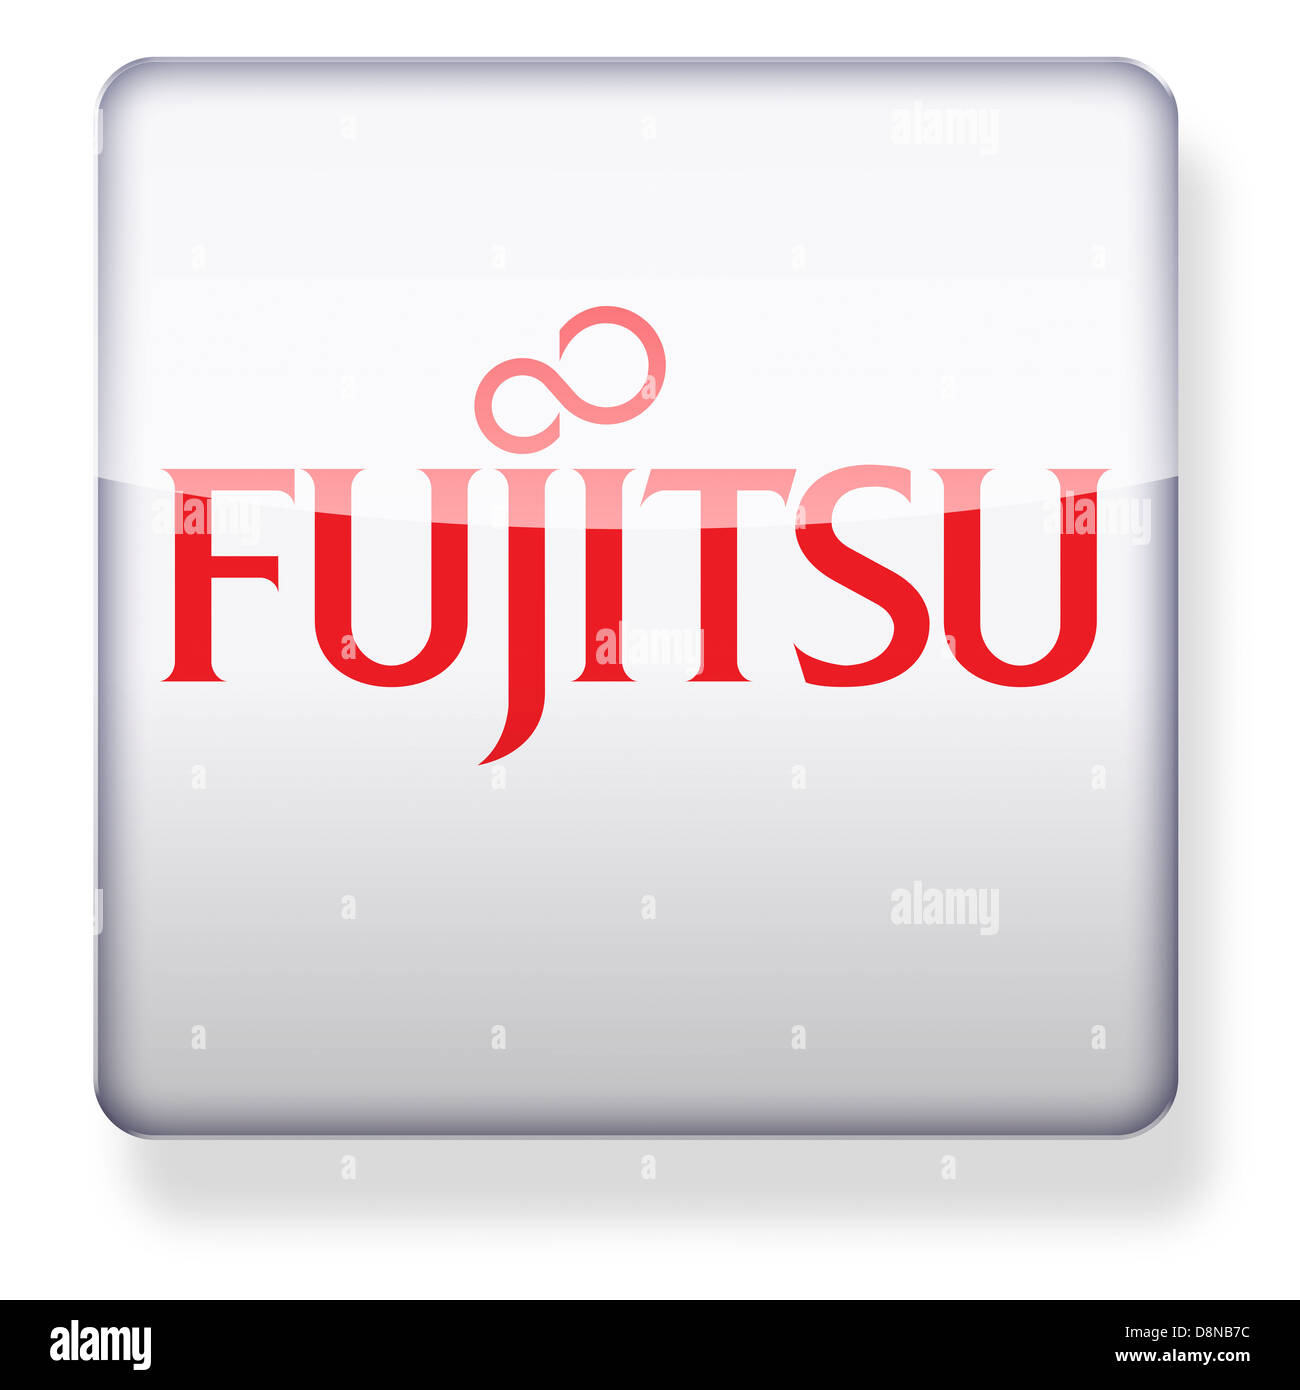 Fujitsu logo as an app icon. Clipping path included. Stock Photo